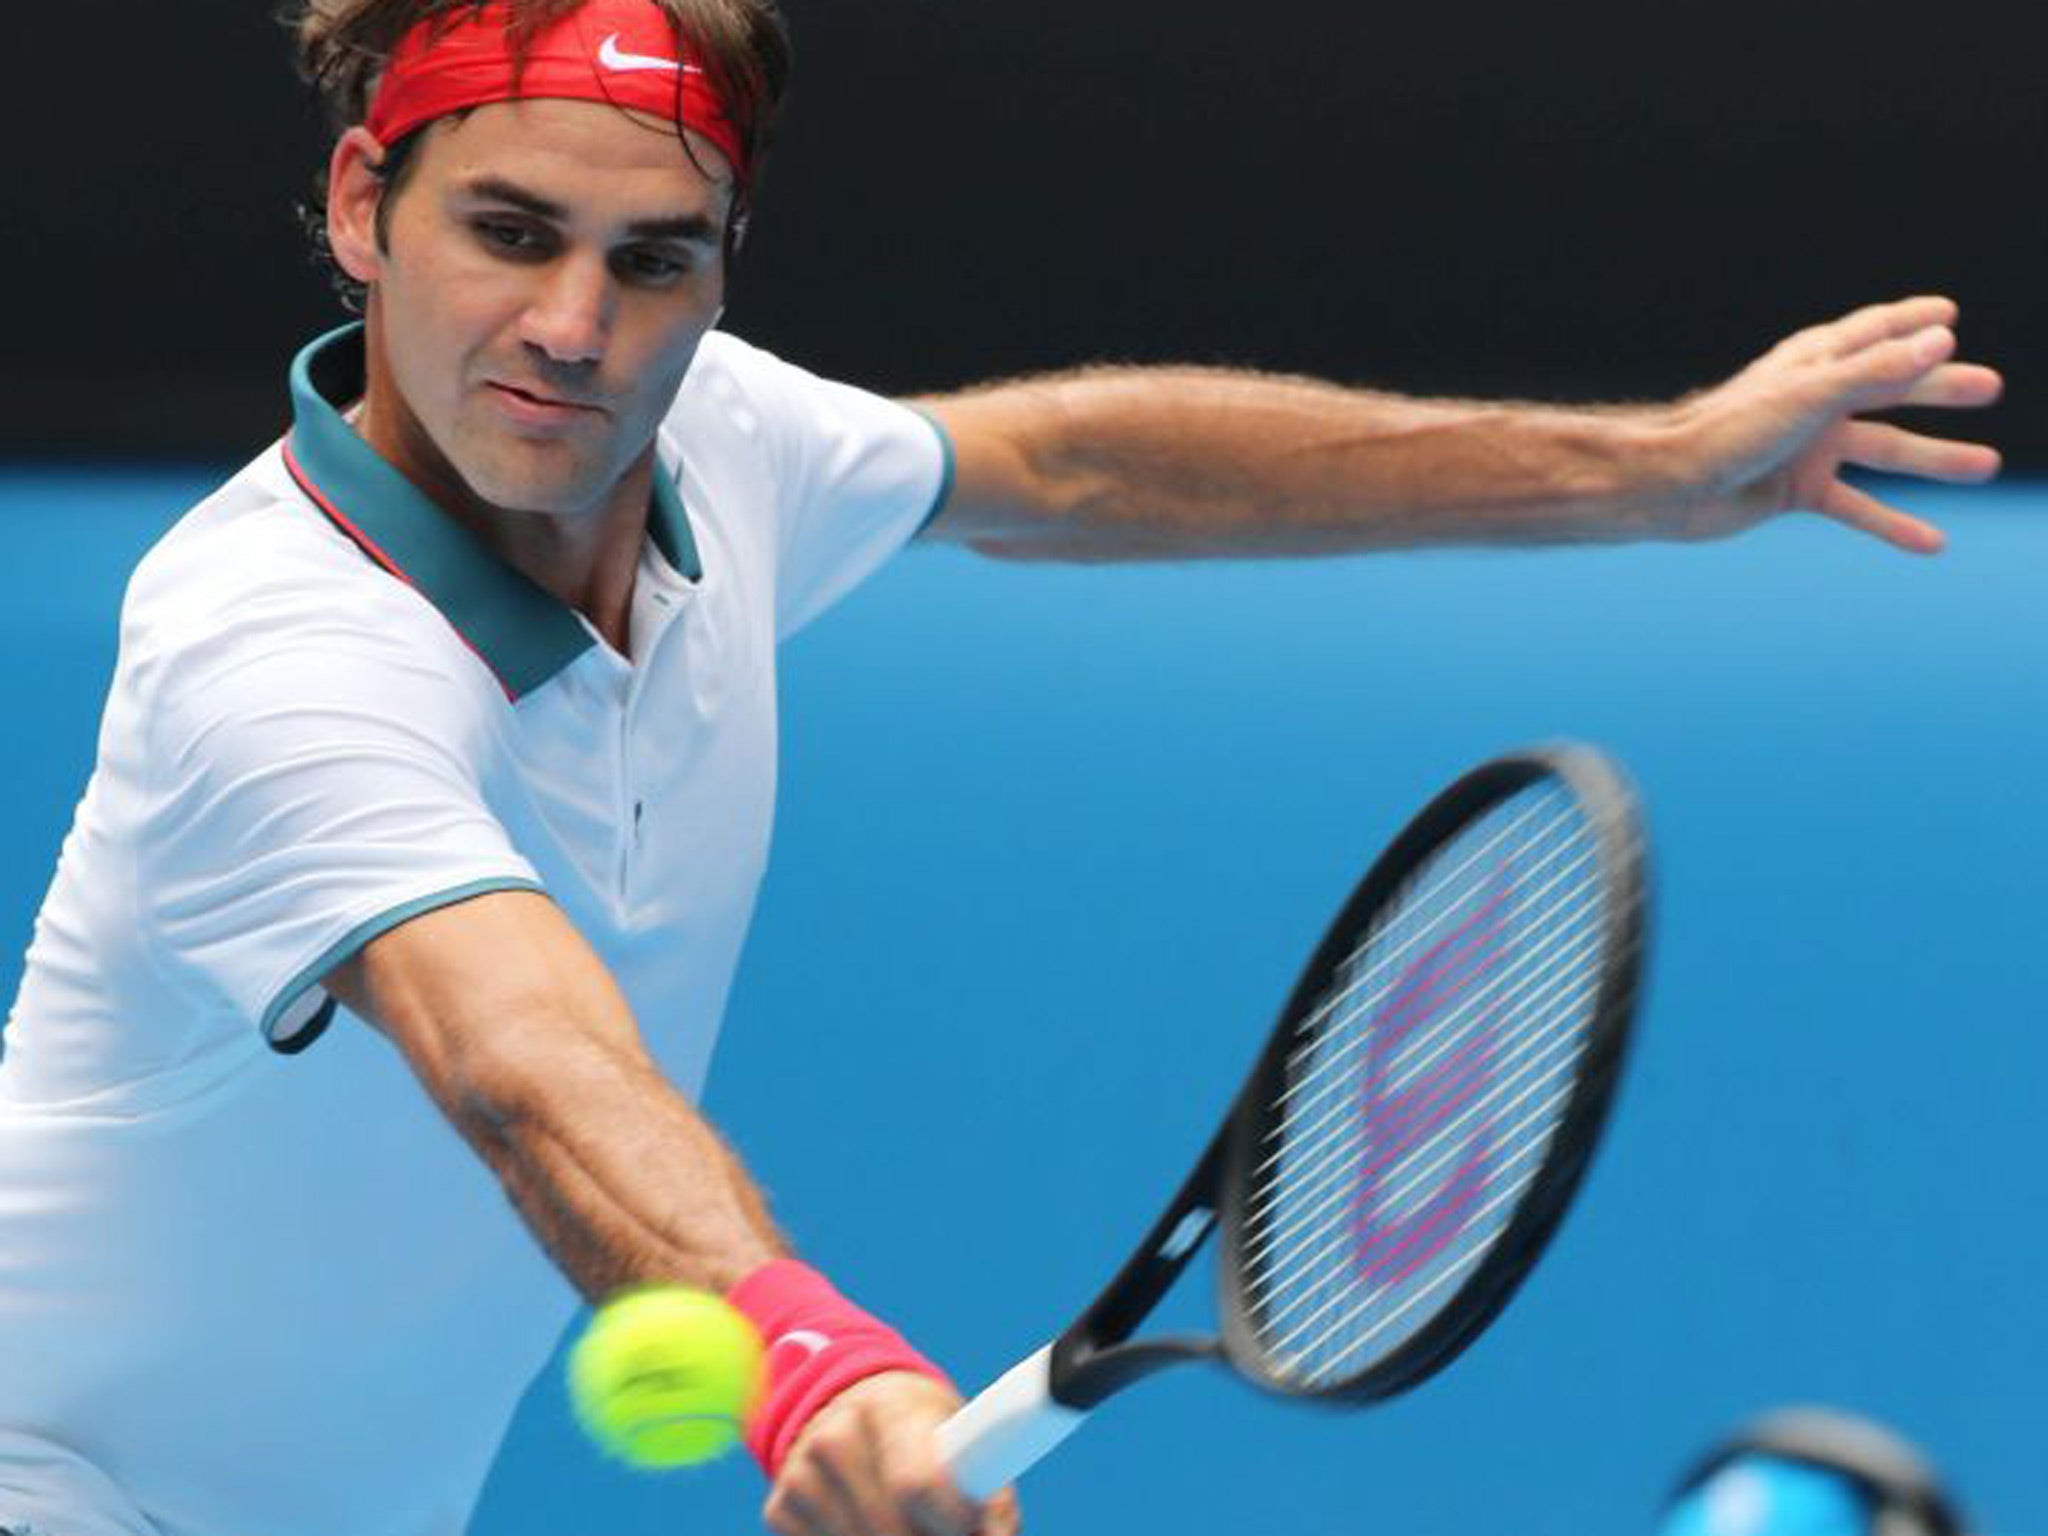 Federer was barely troubled by Russia's Teymuraz Gabashvili, the world number 79